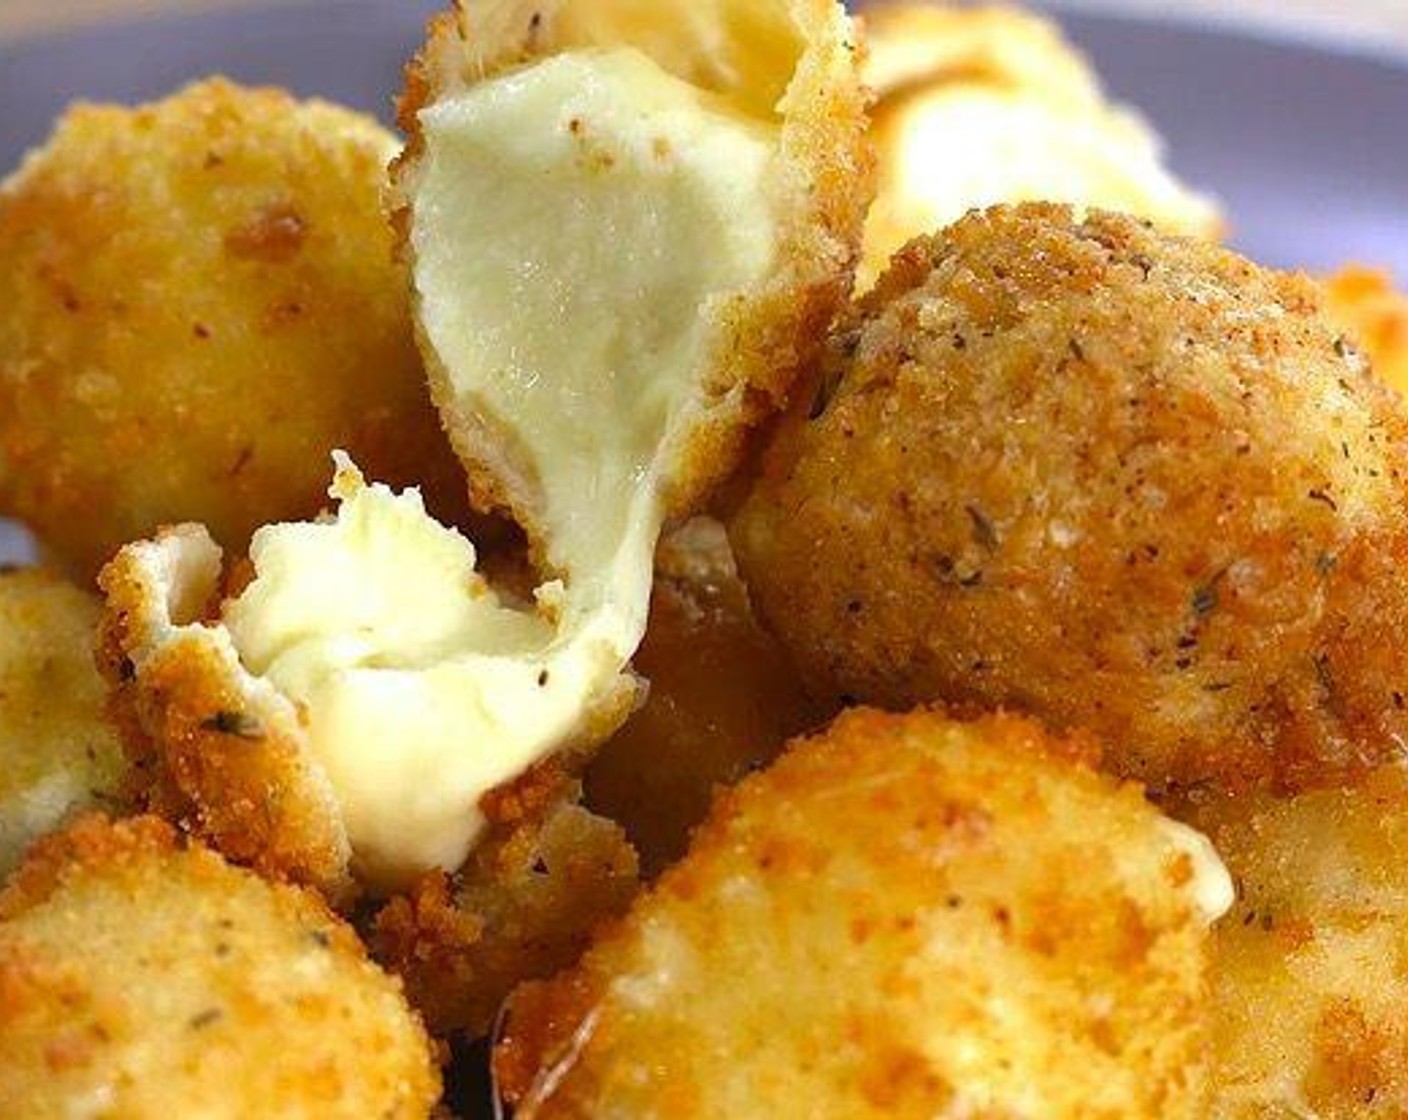 Spicy Cheese Bombs with Chili Mayo